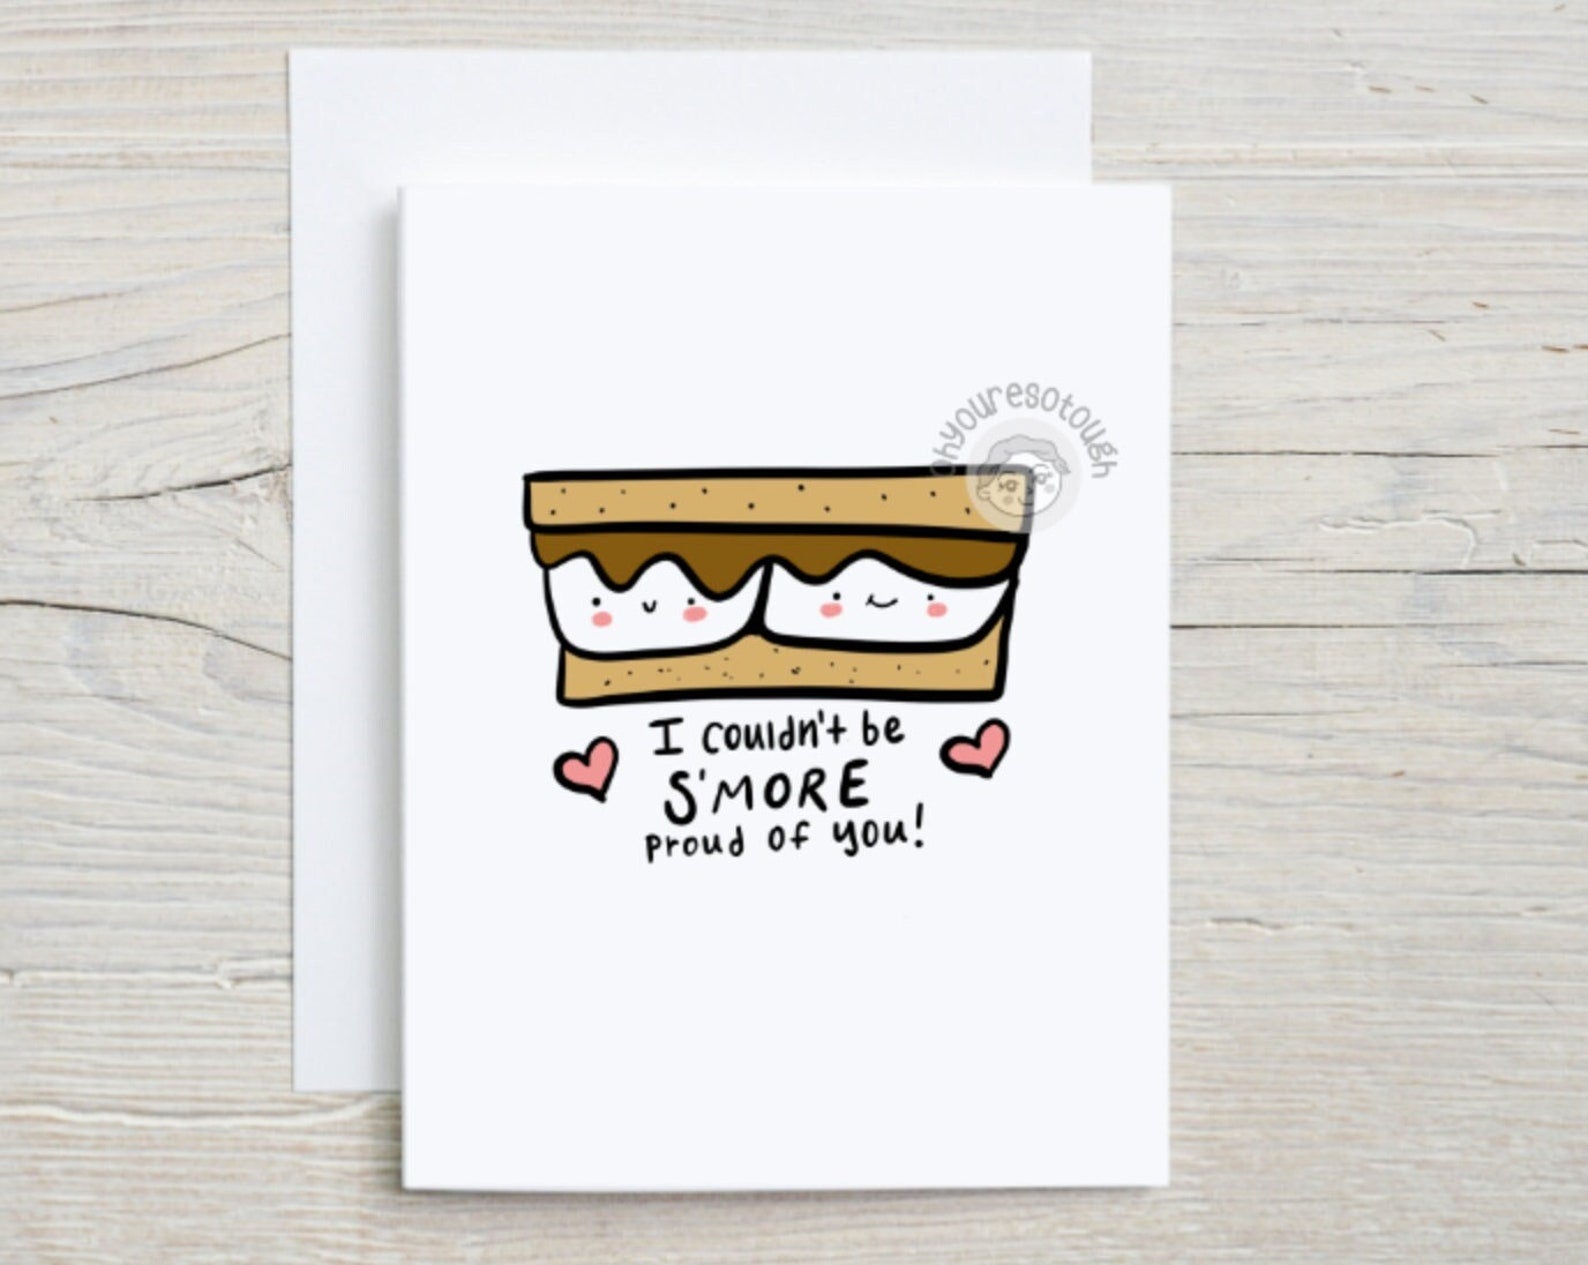 Funny Cute Support Card - Encouragement Card - Inspirational Card - I Love You Card - Sympathy Card - Humor Friend Support Car